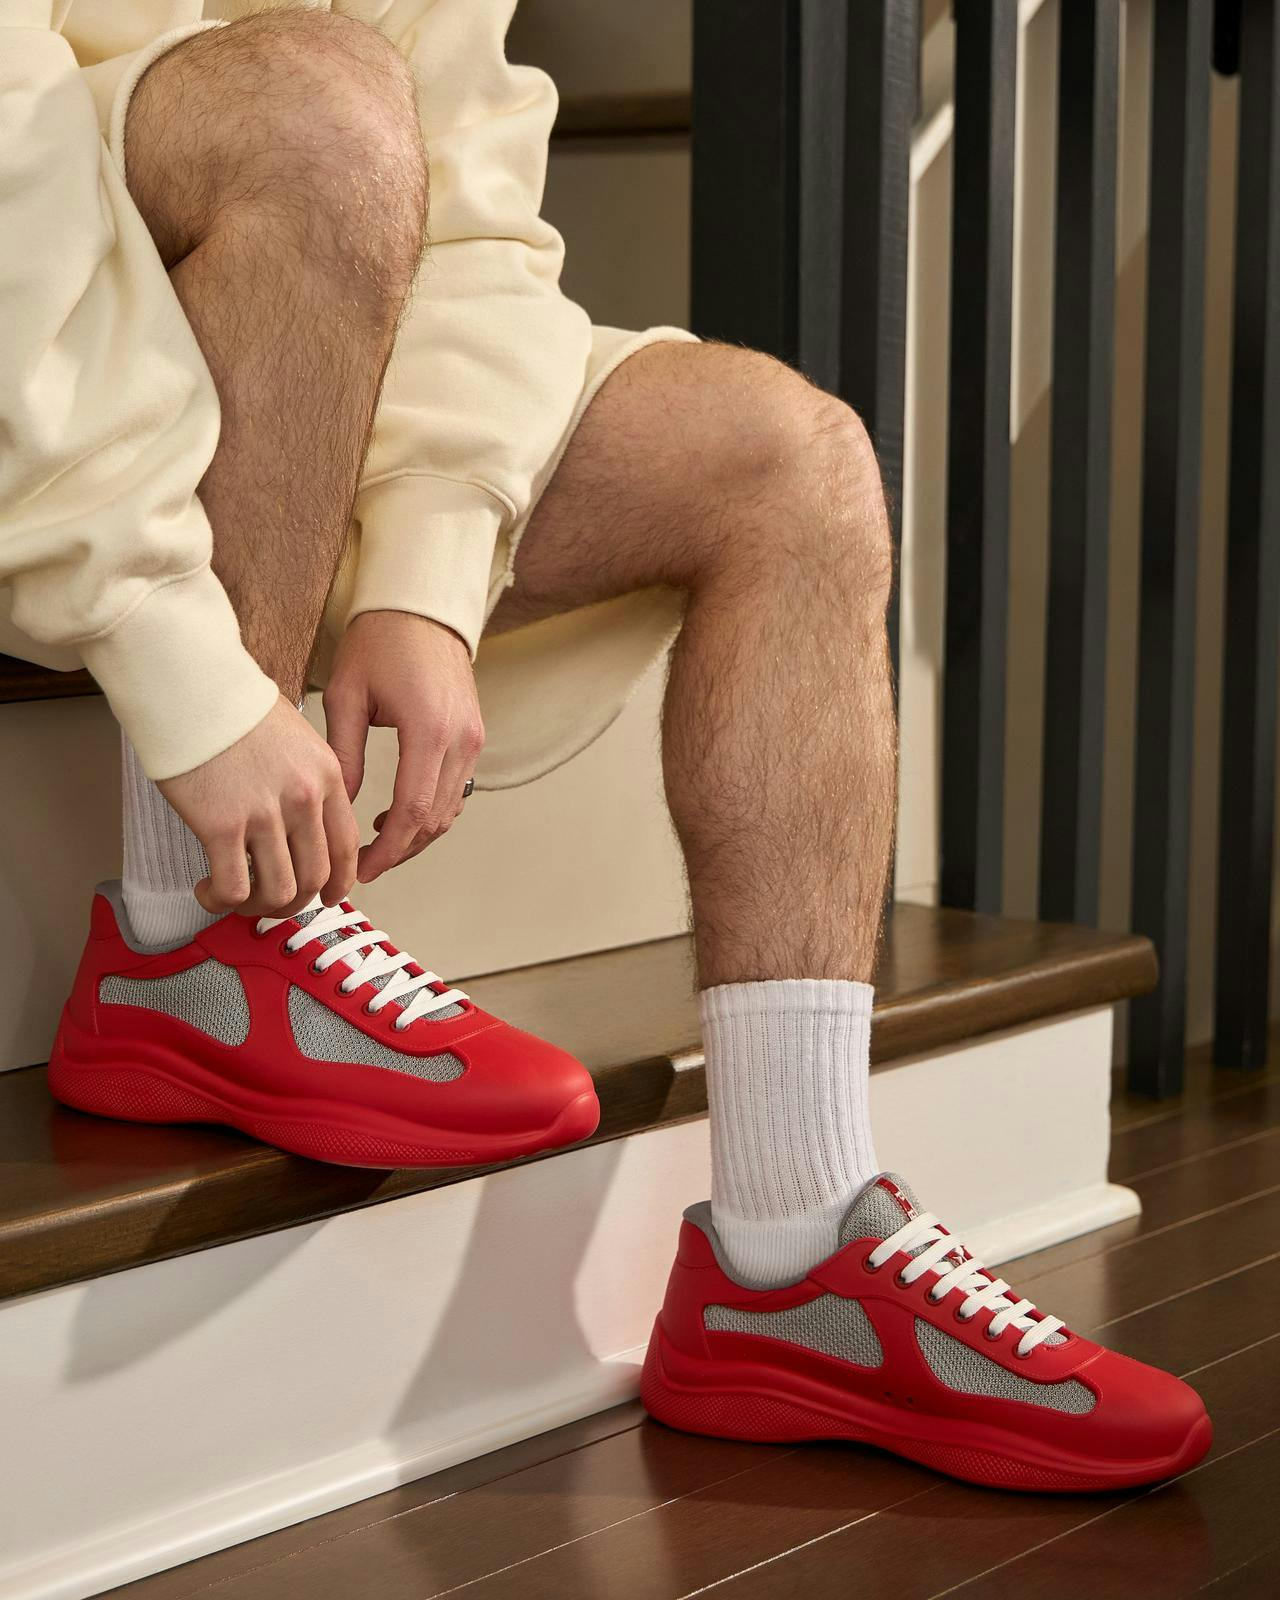 a man wearing red prada shoes tying his shoes